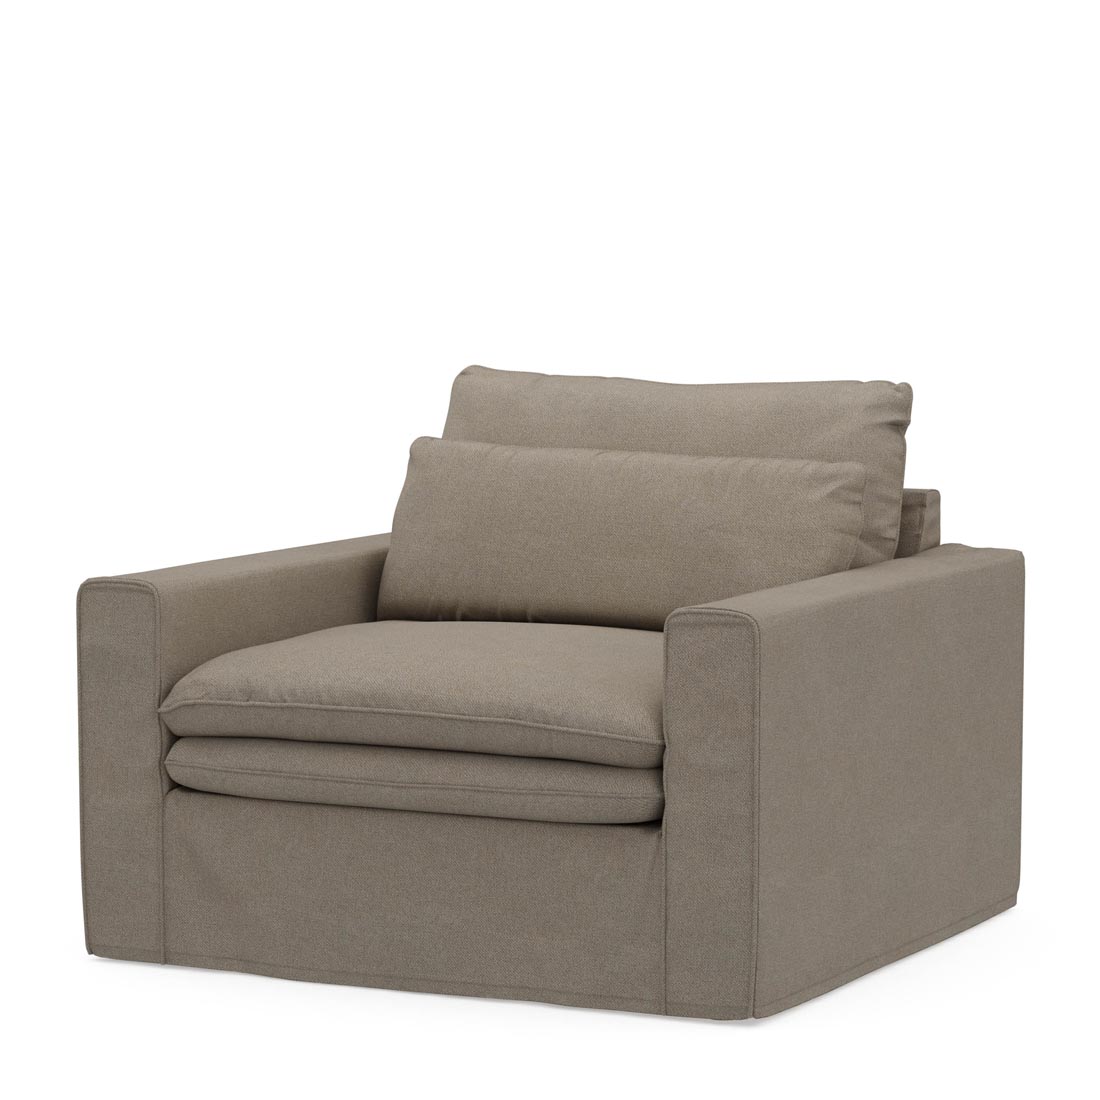 Continental Love Seat, oxford weave, anvers flax